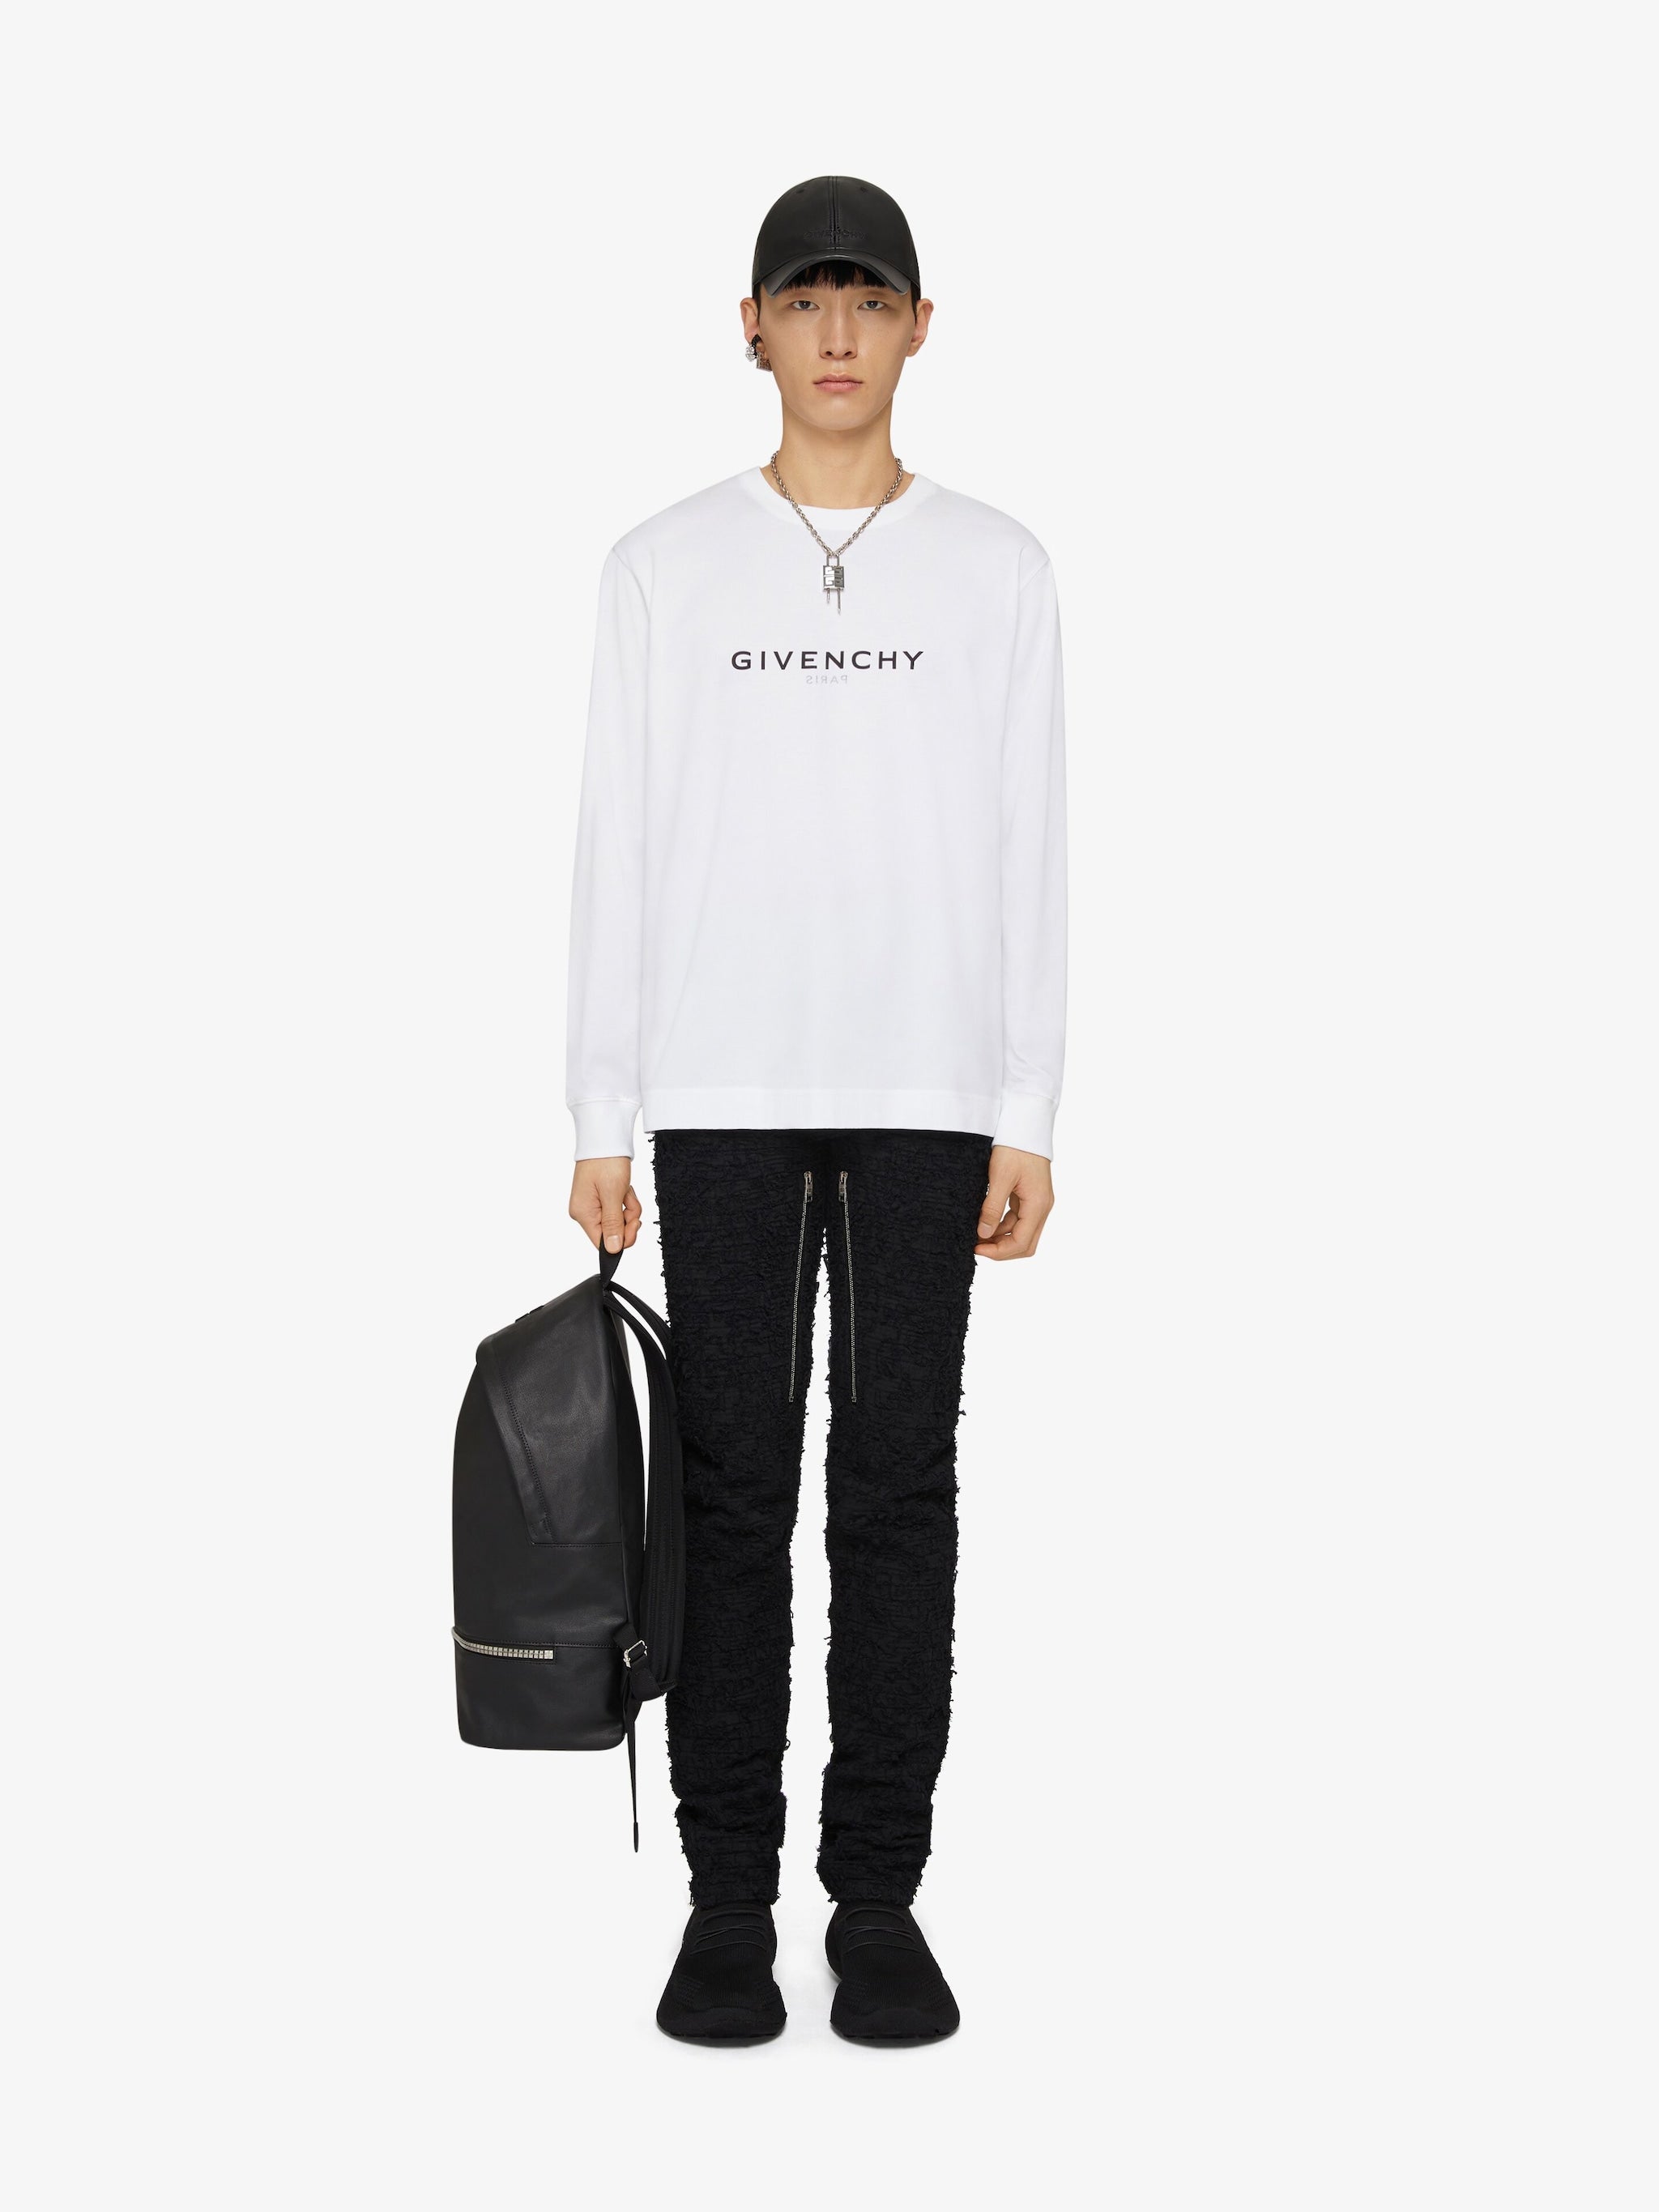 Kids White Printed Long Sleeve T-Shirt by Givenchy on Sale